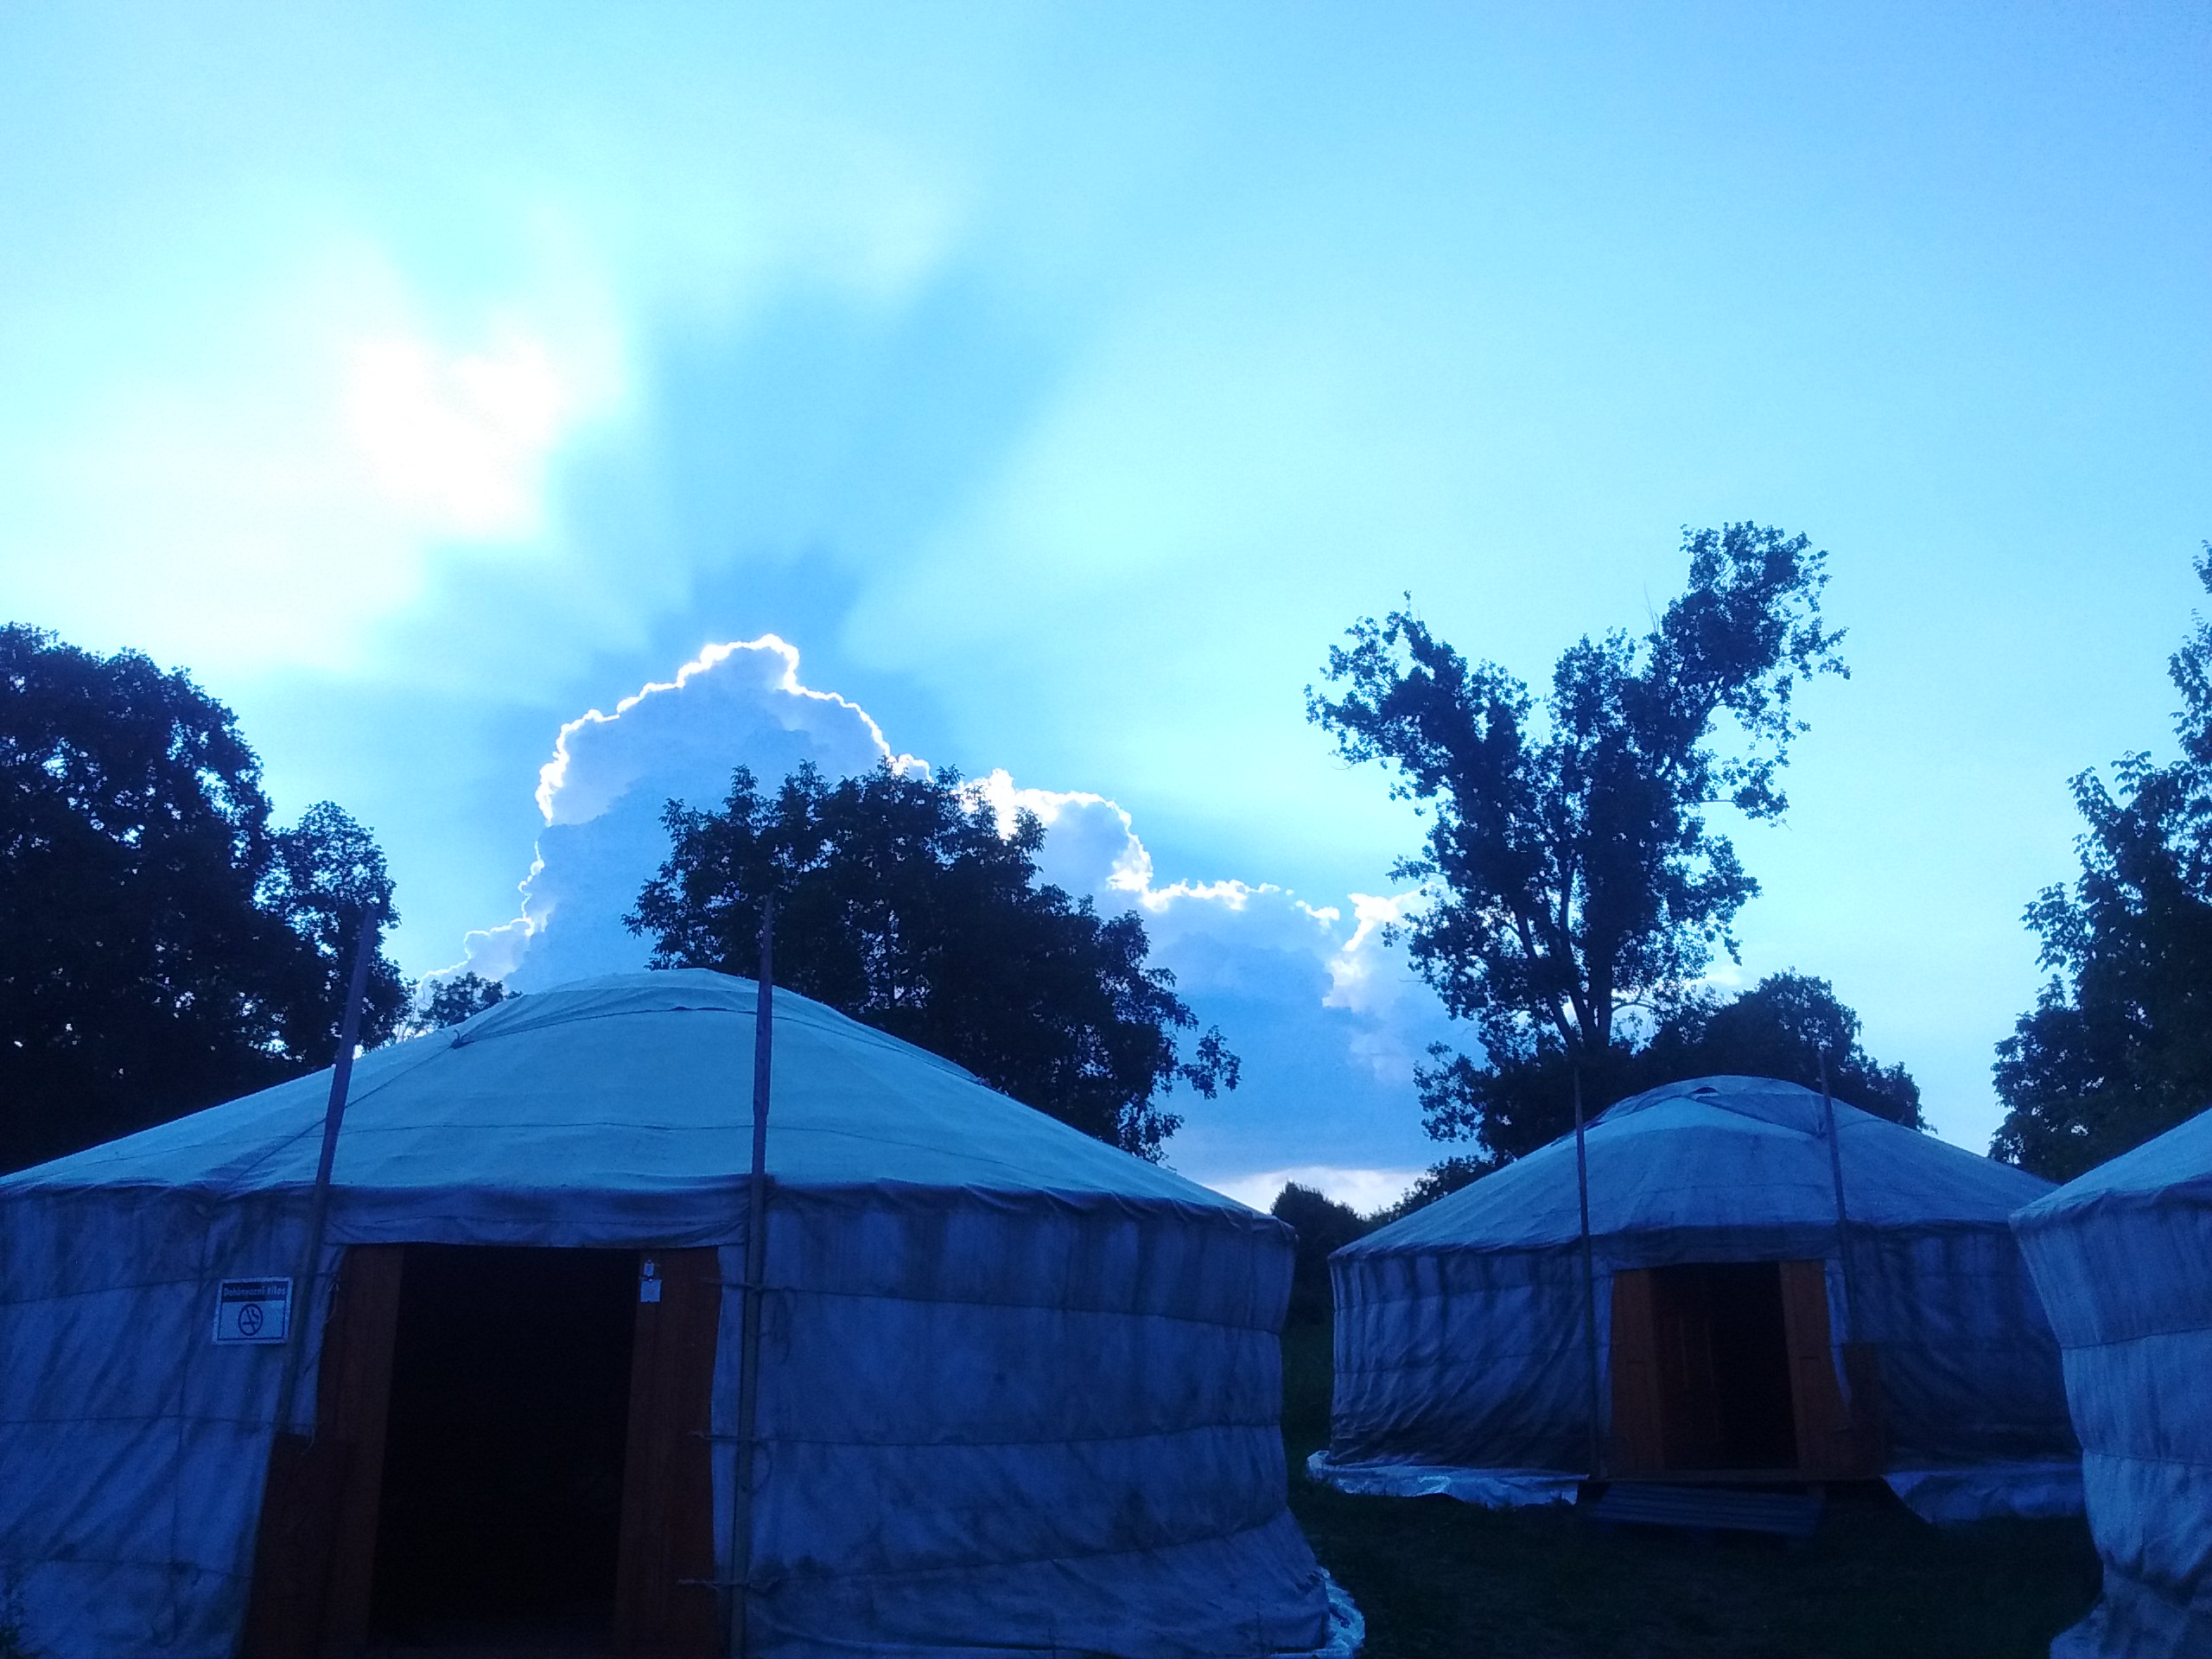 Yurt camp at sunset - at the beginning of my year in Hungary